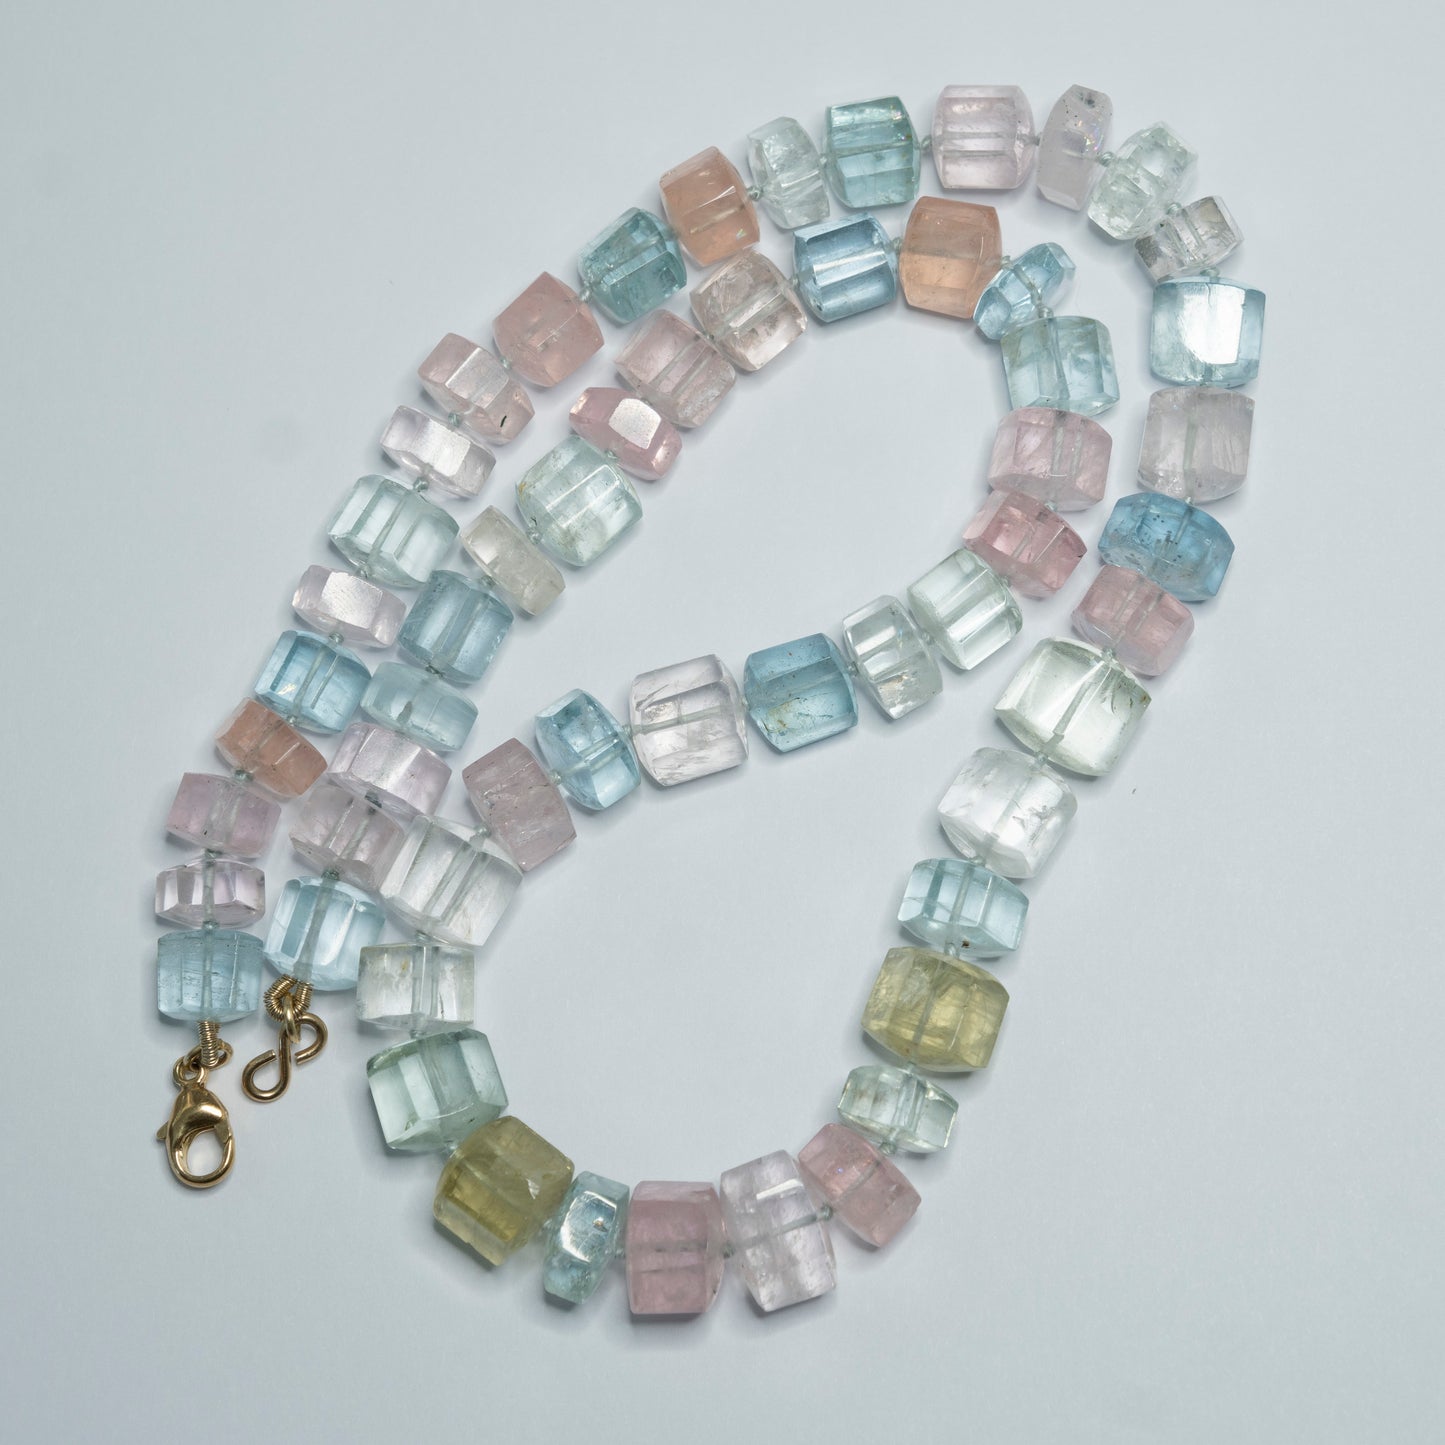 beryl candy necklace crystal cut aquamarine march birthstone necklace beaded knotted necklaces jewelry 14k